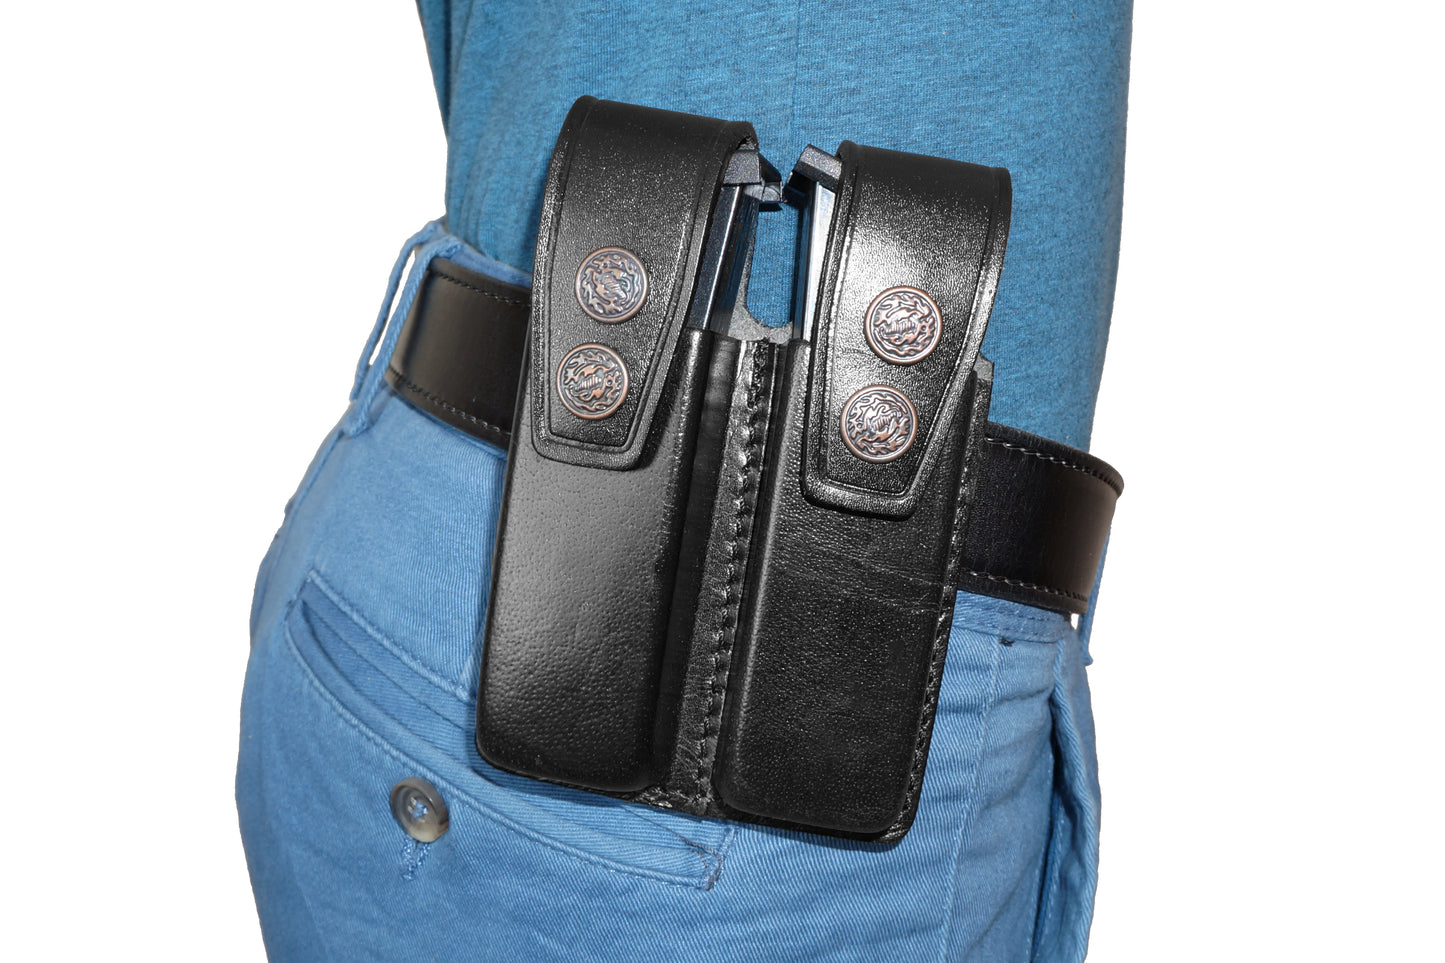 Double Magazine Pouch/Carrier/case for Beretta, Taurus, CZ 75, Leather Handmade! (ALIS006)